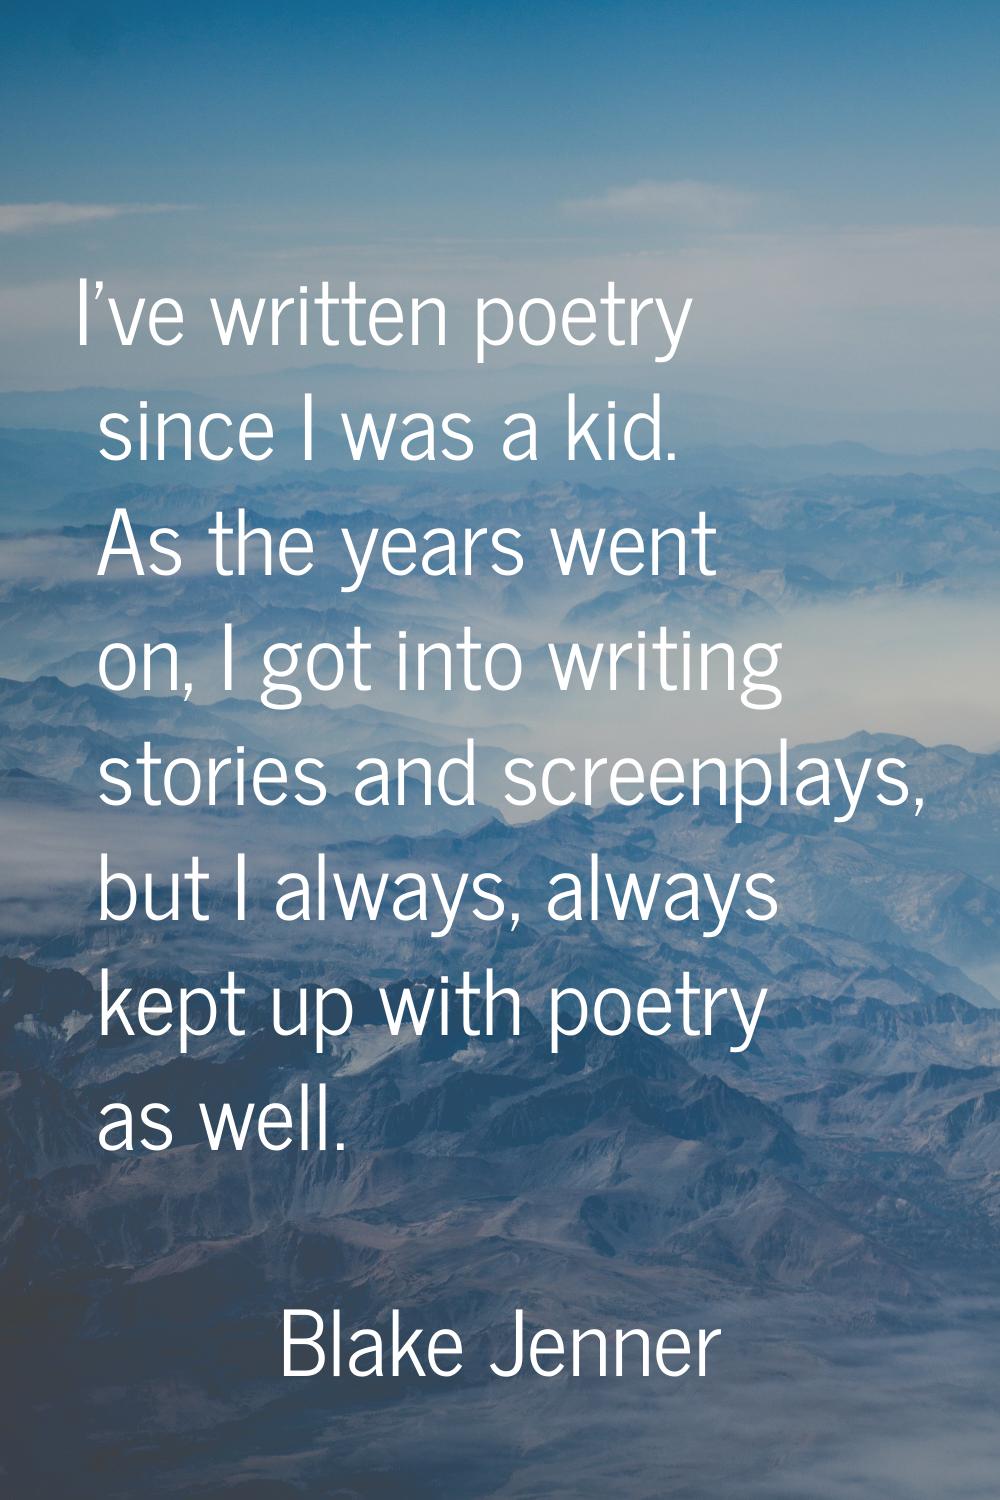 I've written poetry since I was a kid. As the years went on, I got into writing stories and screenp